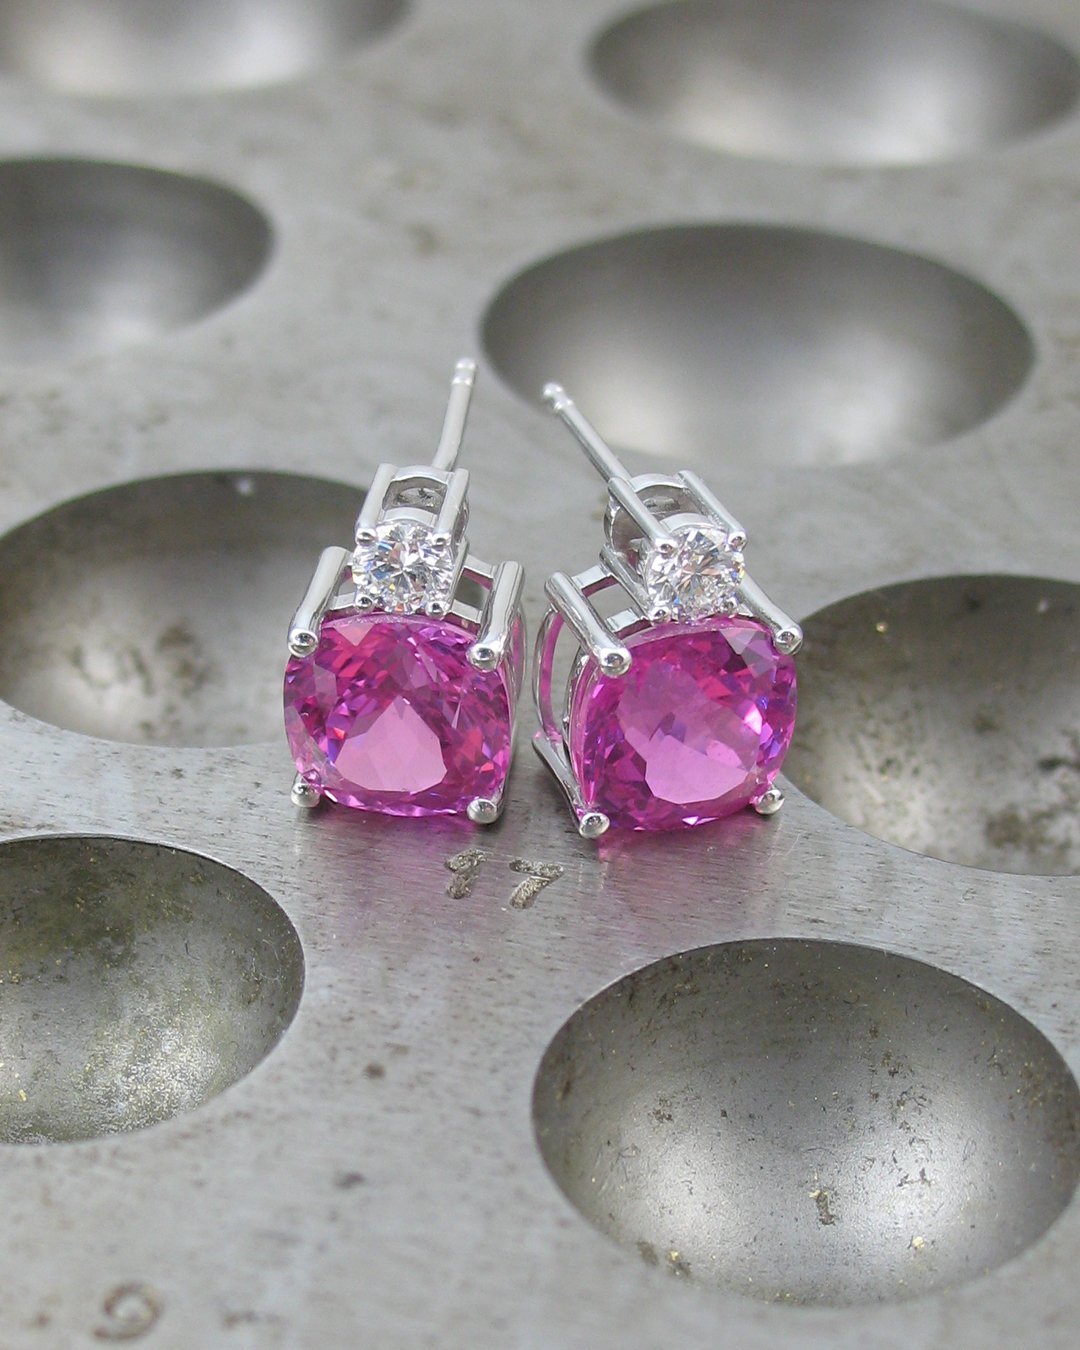 A beautiful pair of vibrant pink sapphire earrings